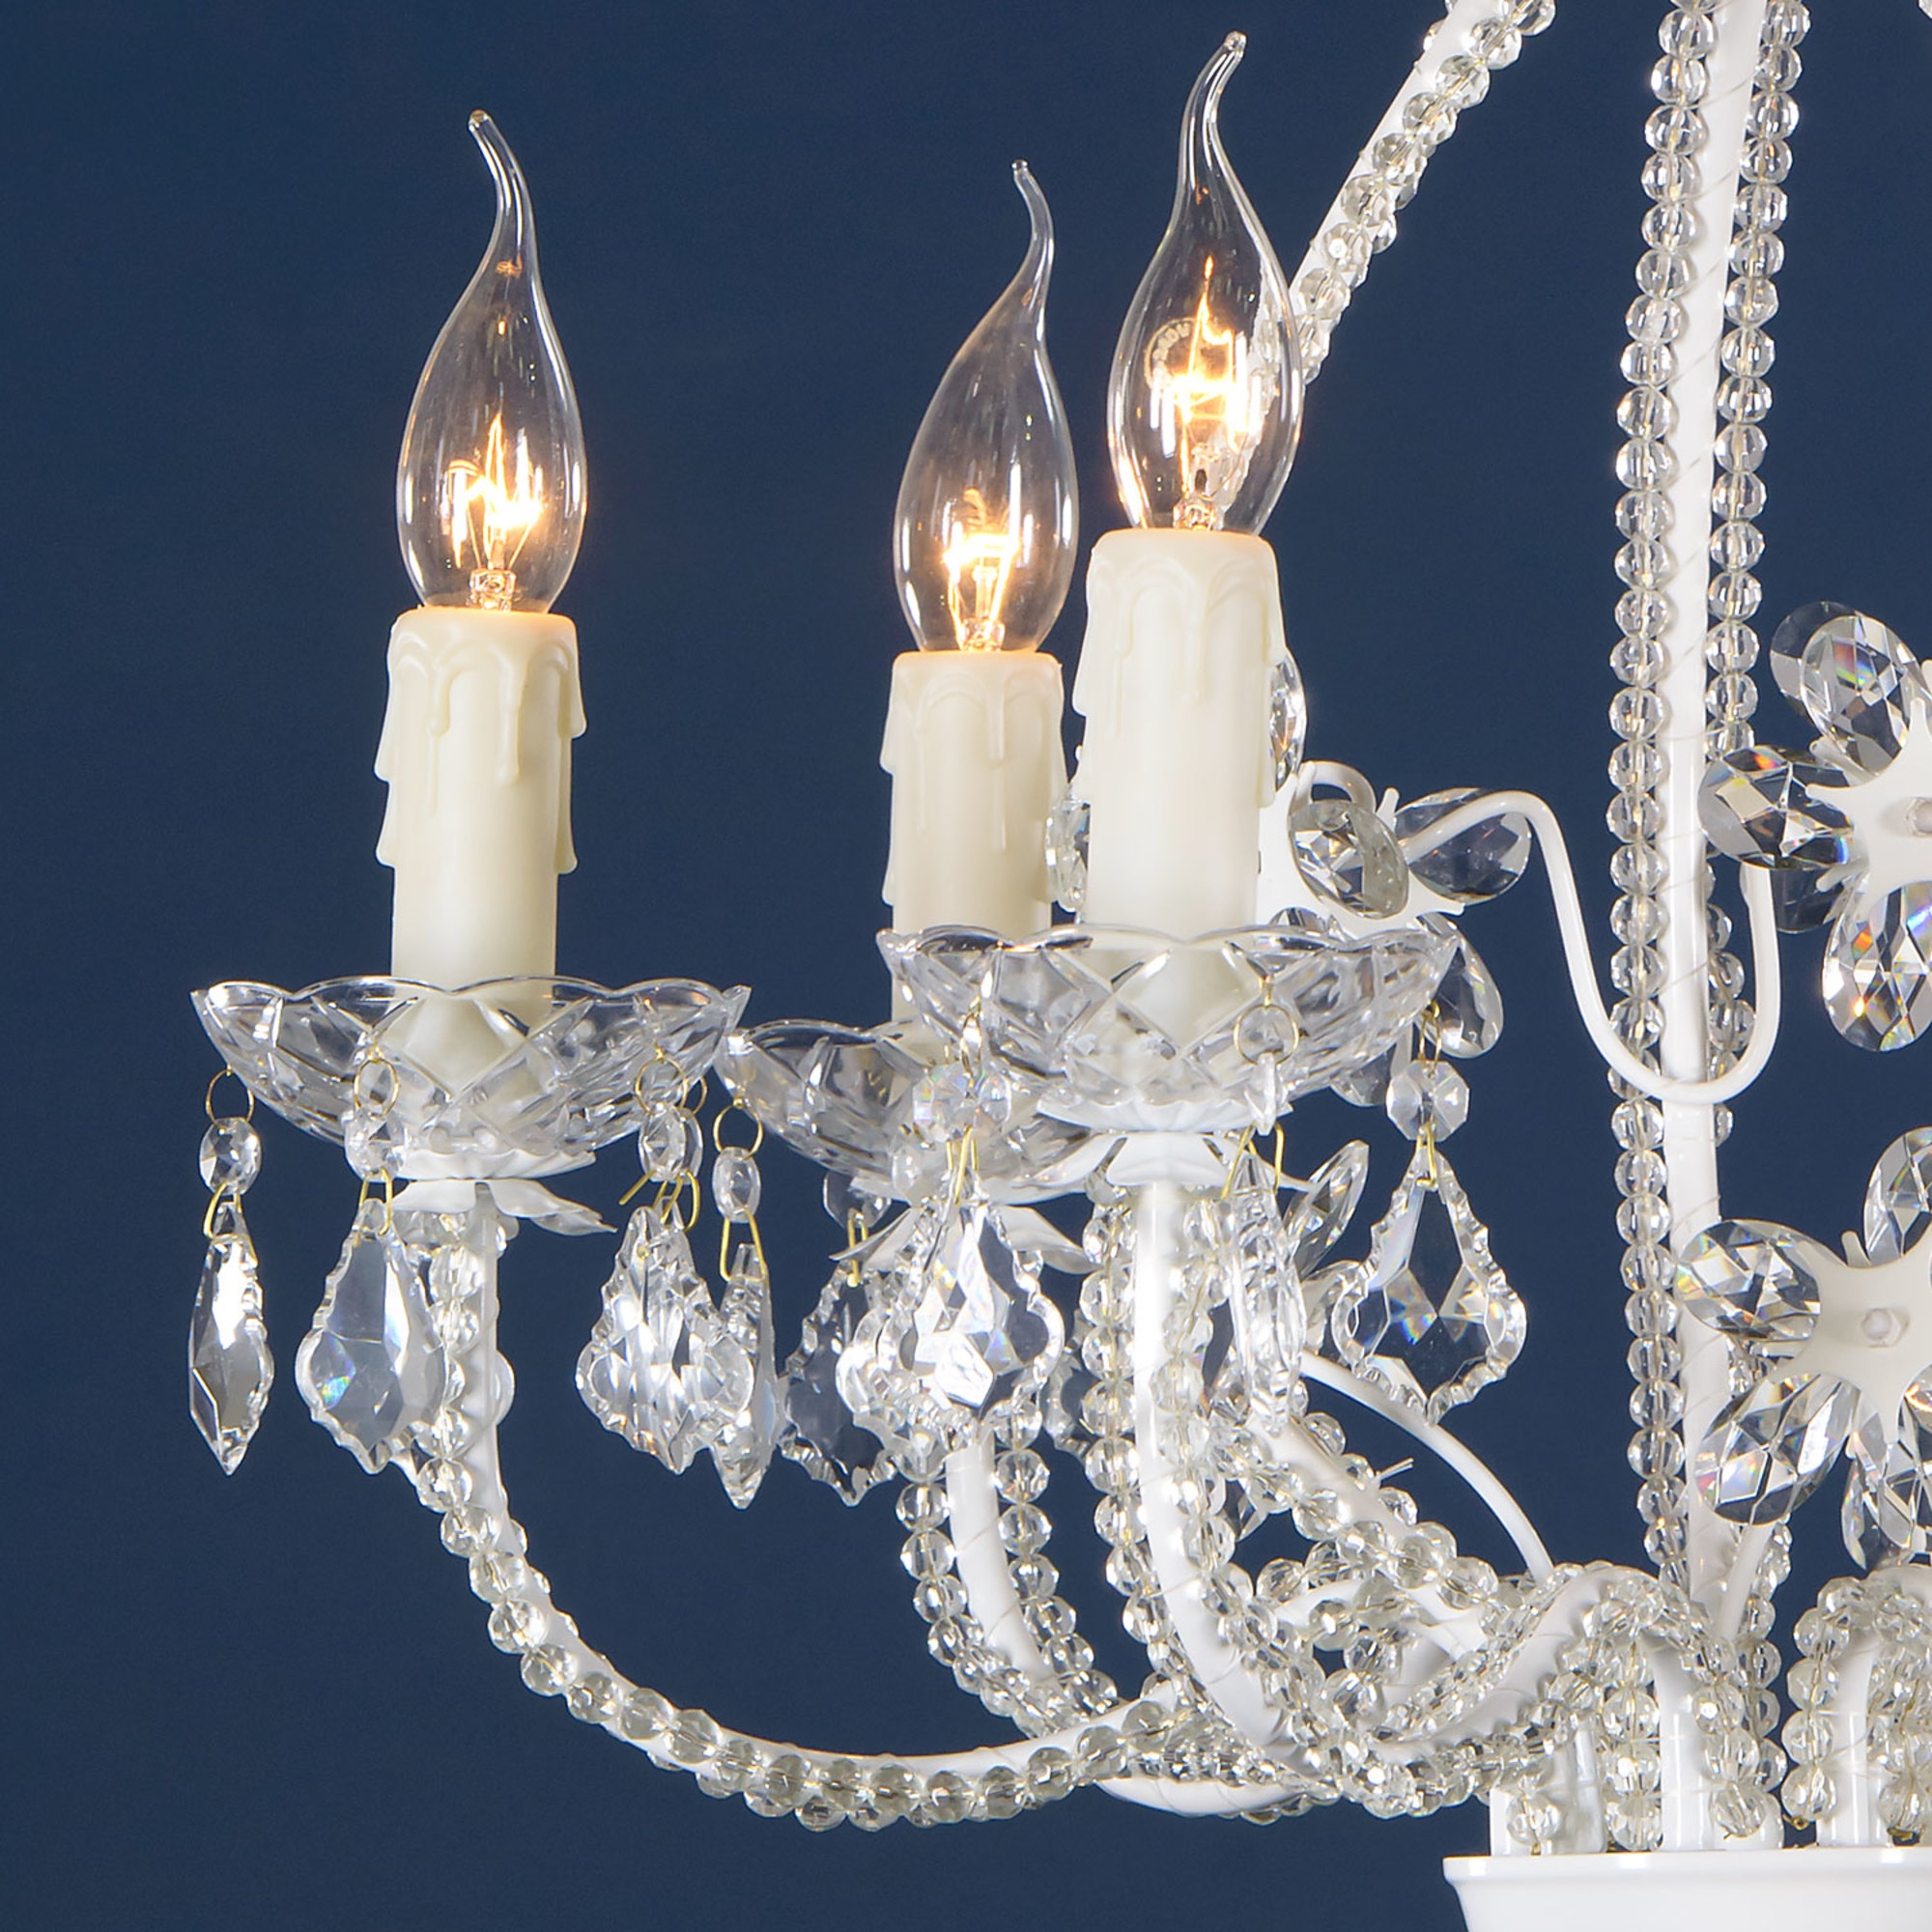 6 Light Chandelier - White Enamel and Clear